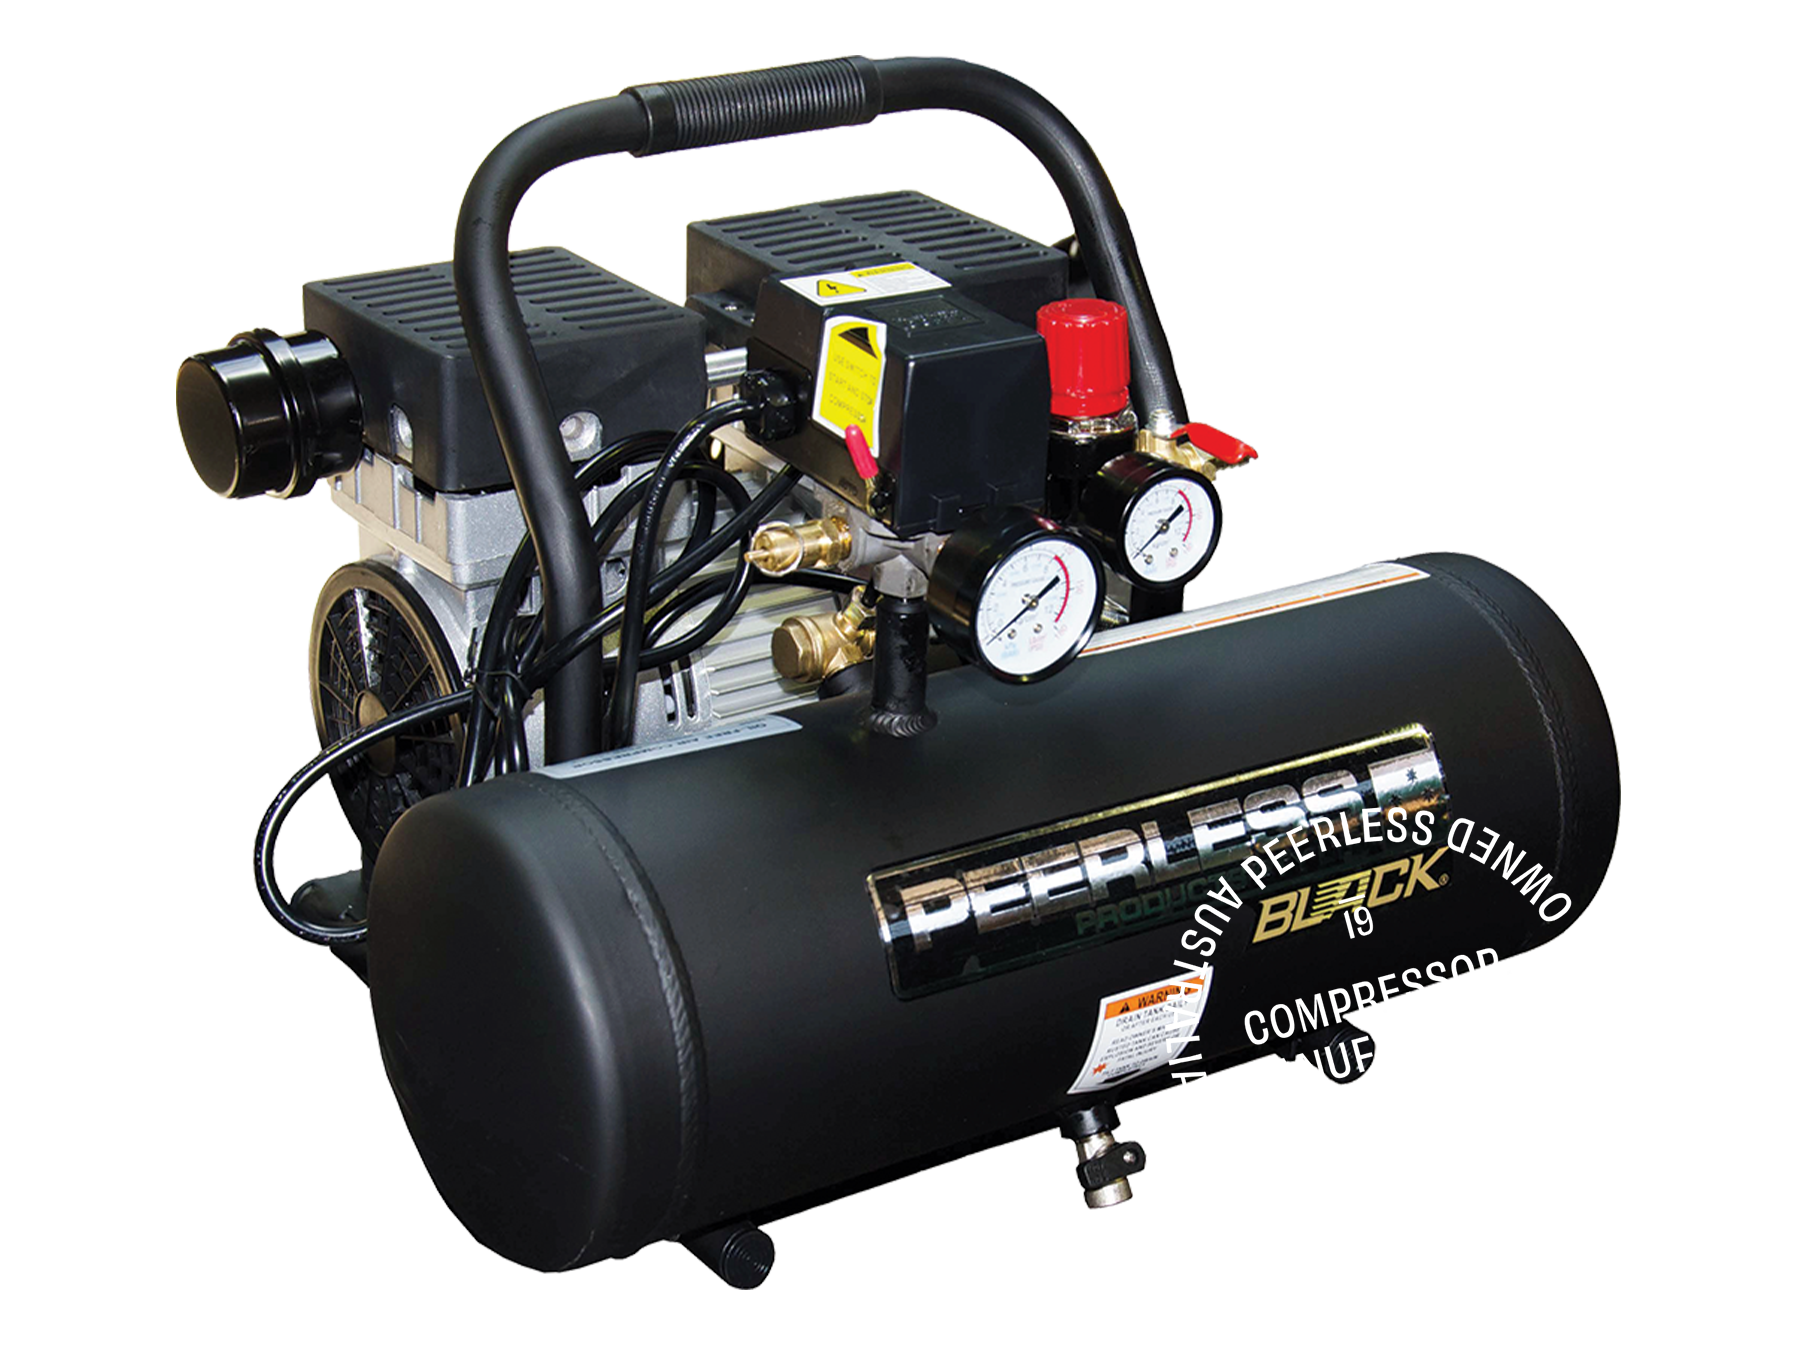 PB2000 Single Phase Air Compressor: Oilless, Direct Drive, 10Amp, 1HP, 65LPM